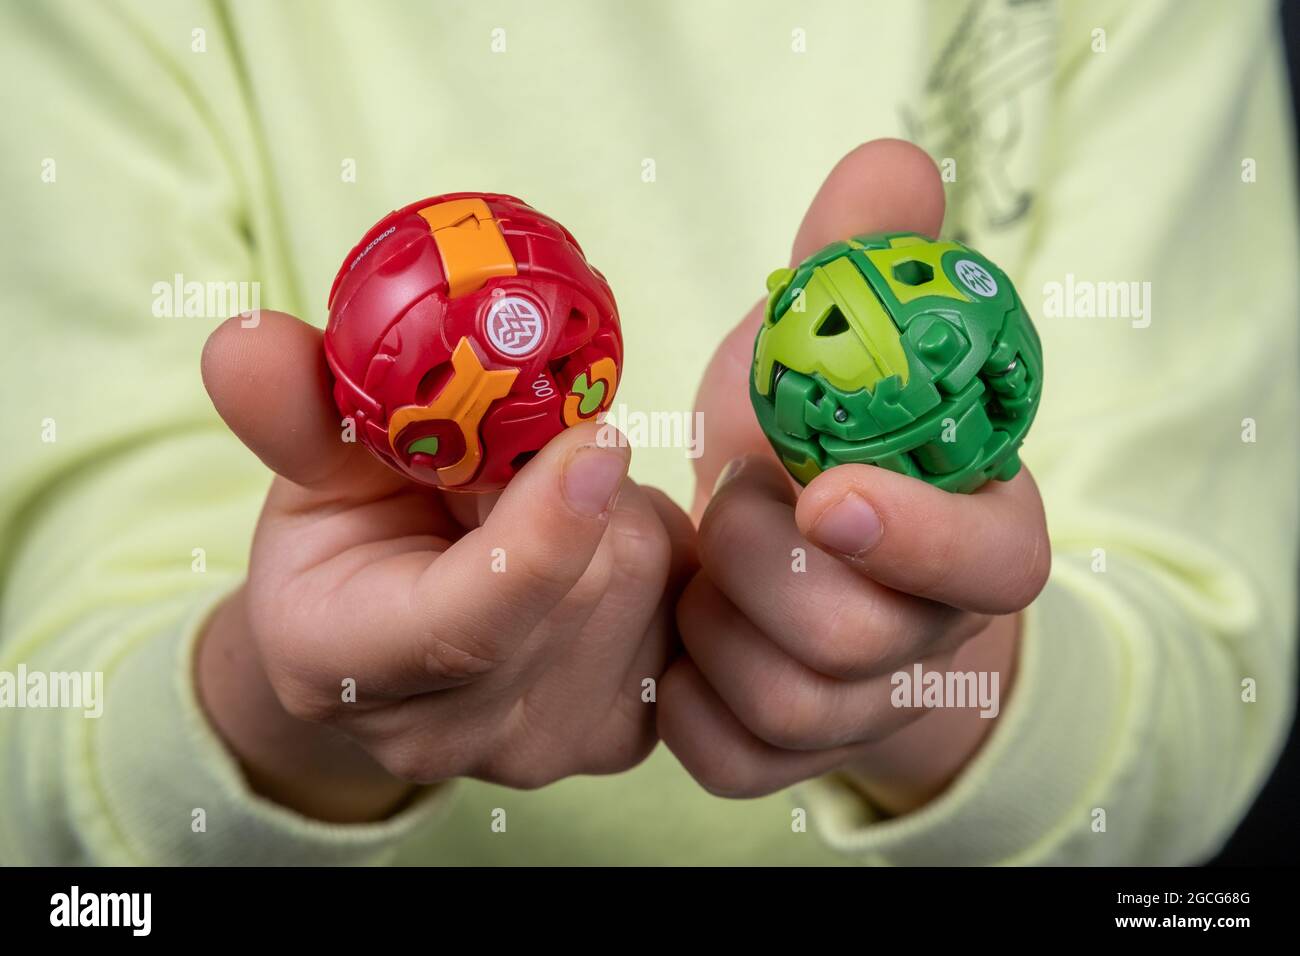 Bakugan Ball toys. New popular transformer toy assembled in ball shape, hold in child's hands. Stafford, United Kingdom, August 8, 2021 Stock Photo